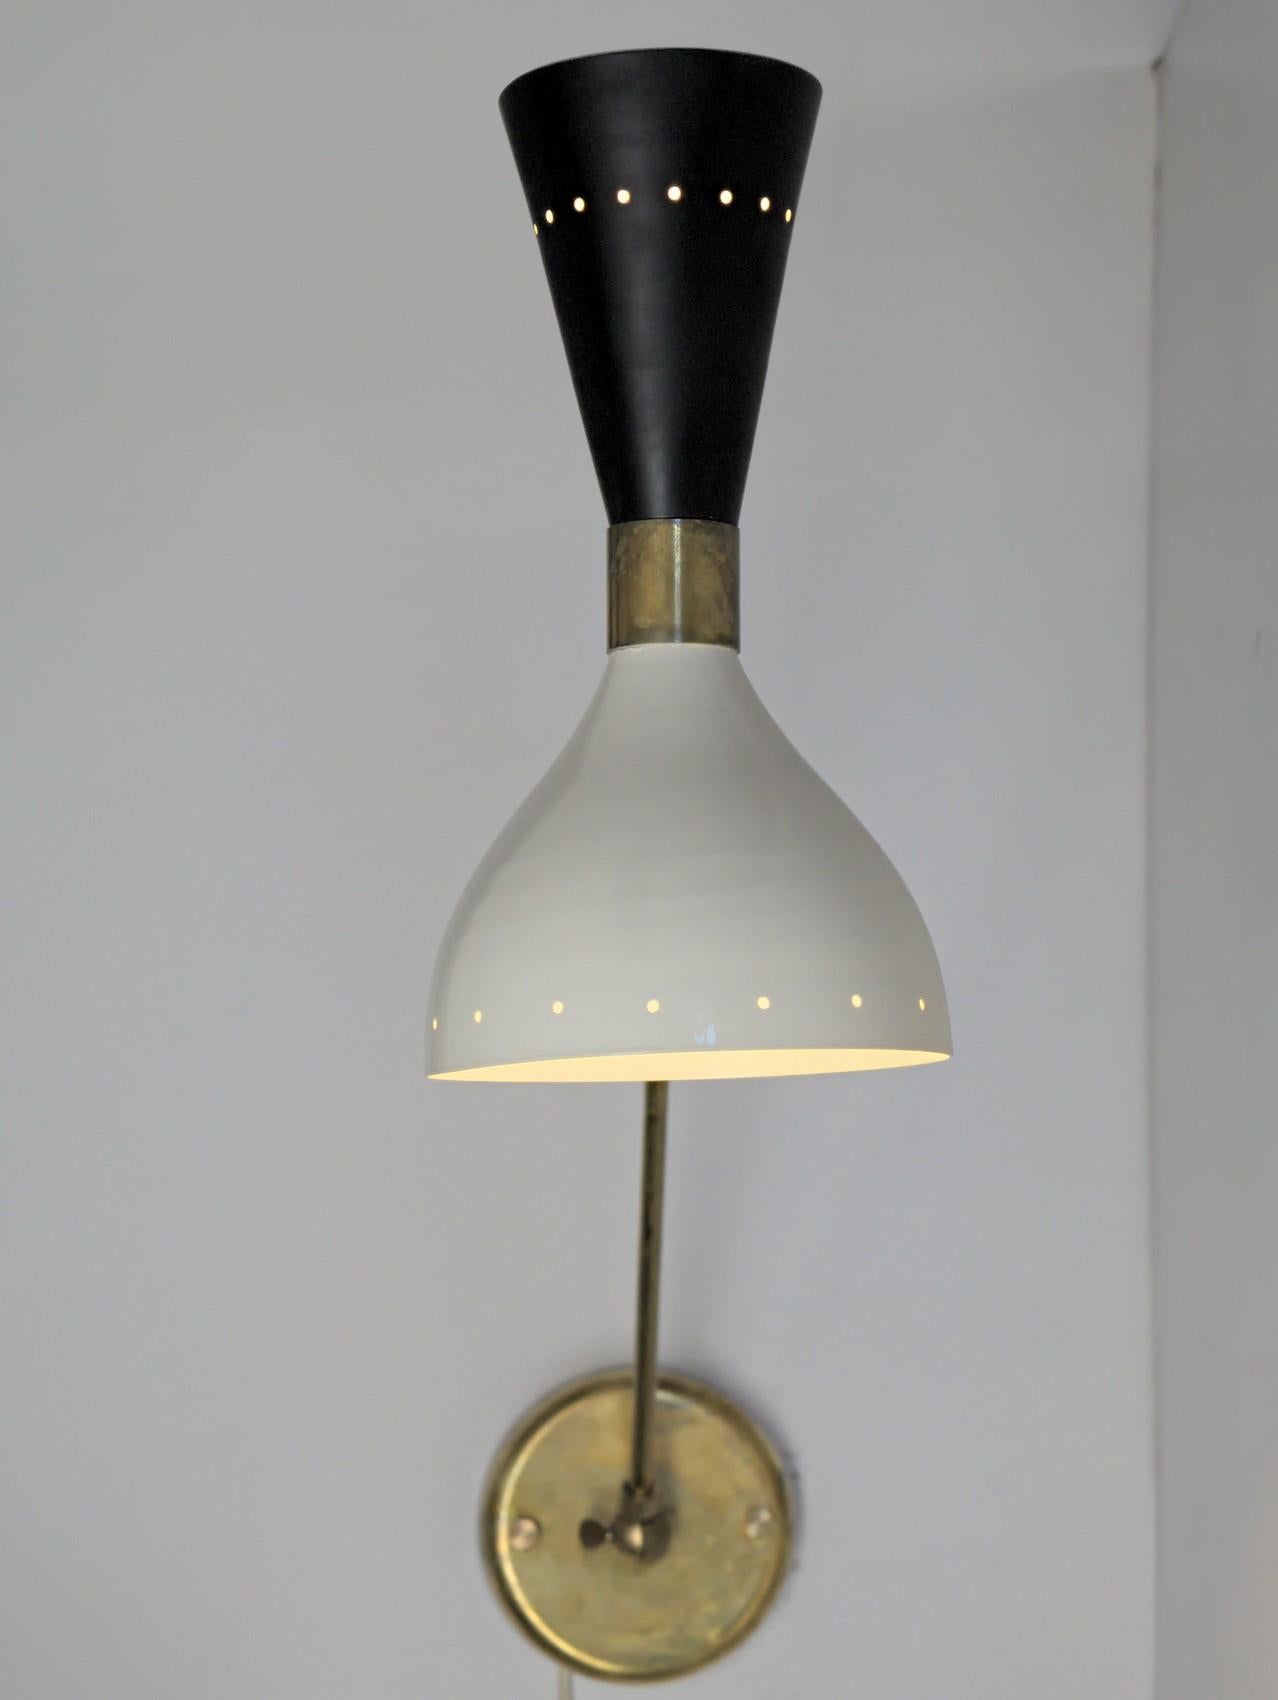 Articulated Sconce Mid-Century Modern Stilnovo Style Solid Brass Black and White For Sale 7